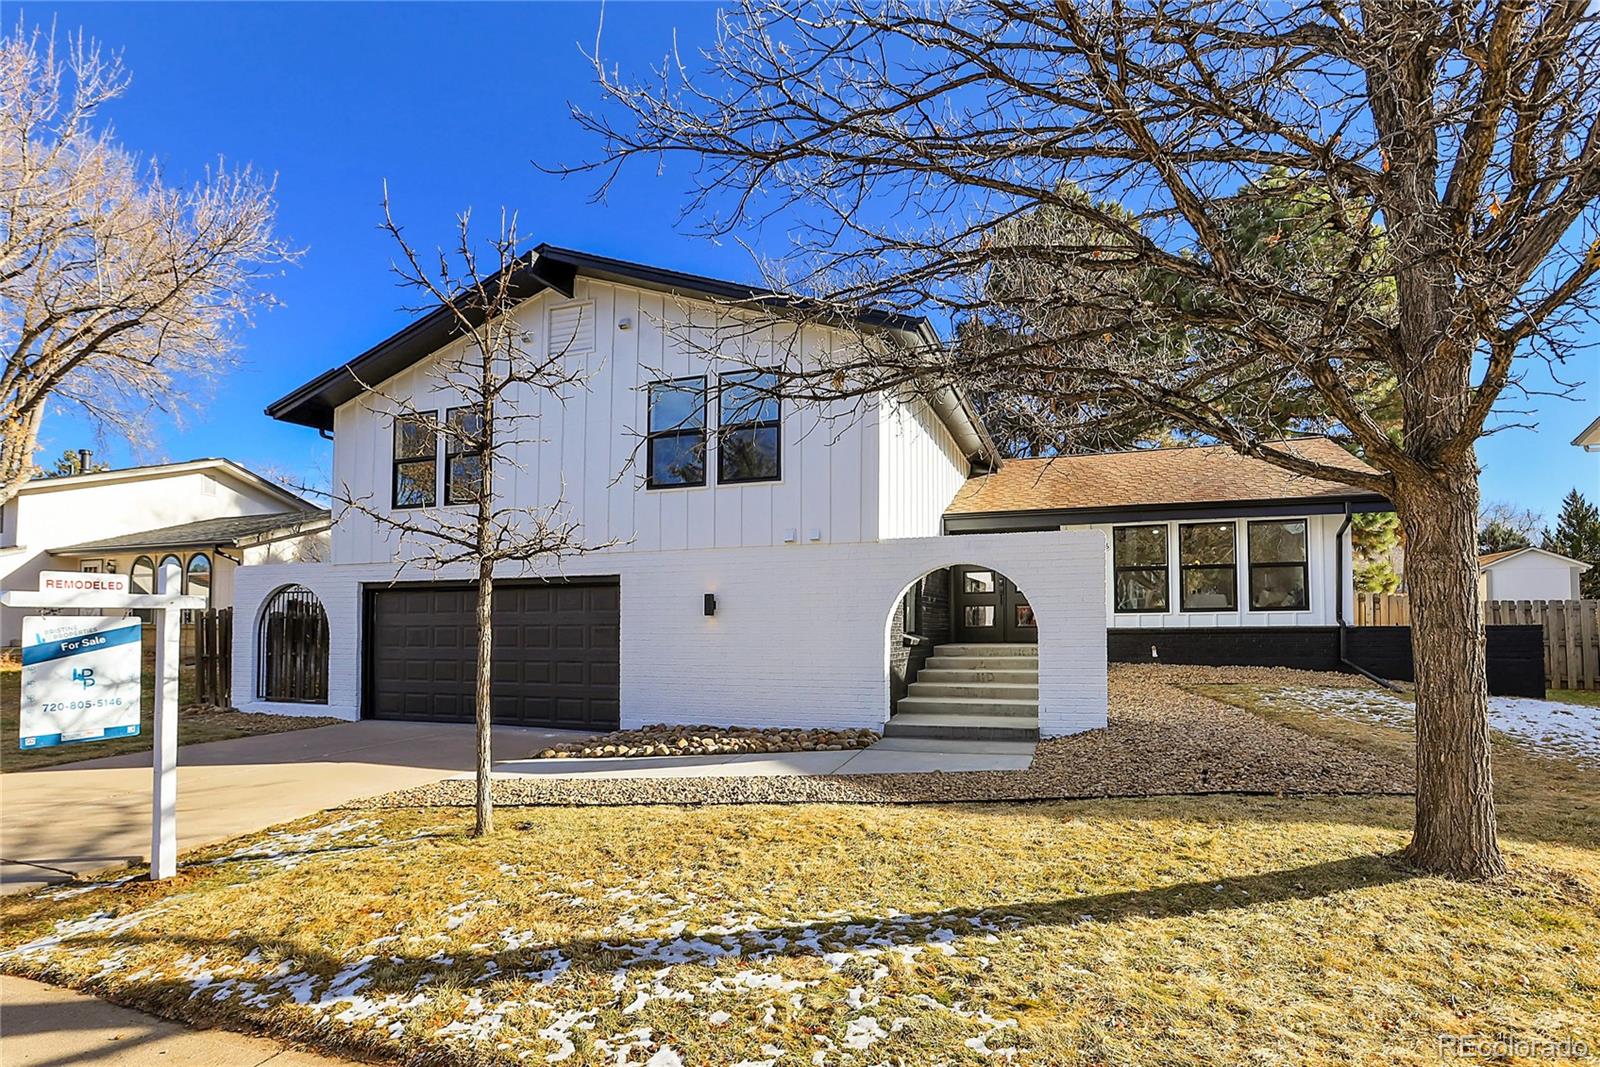 4136 s reading way, Denver sold home. Closed on 2024-02-20 for $970,000.